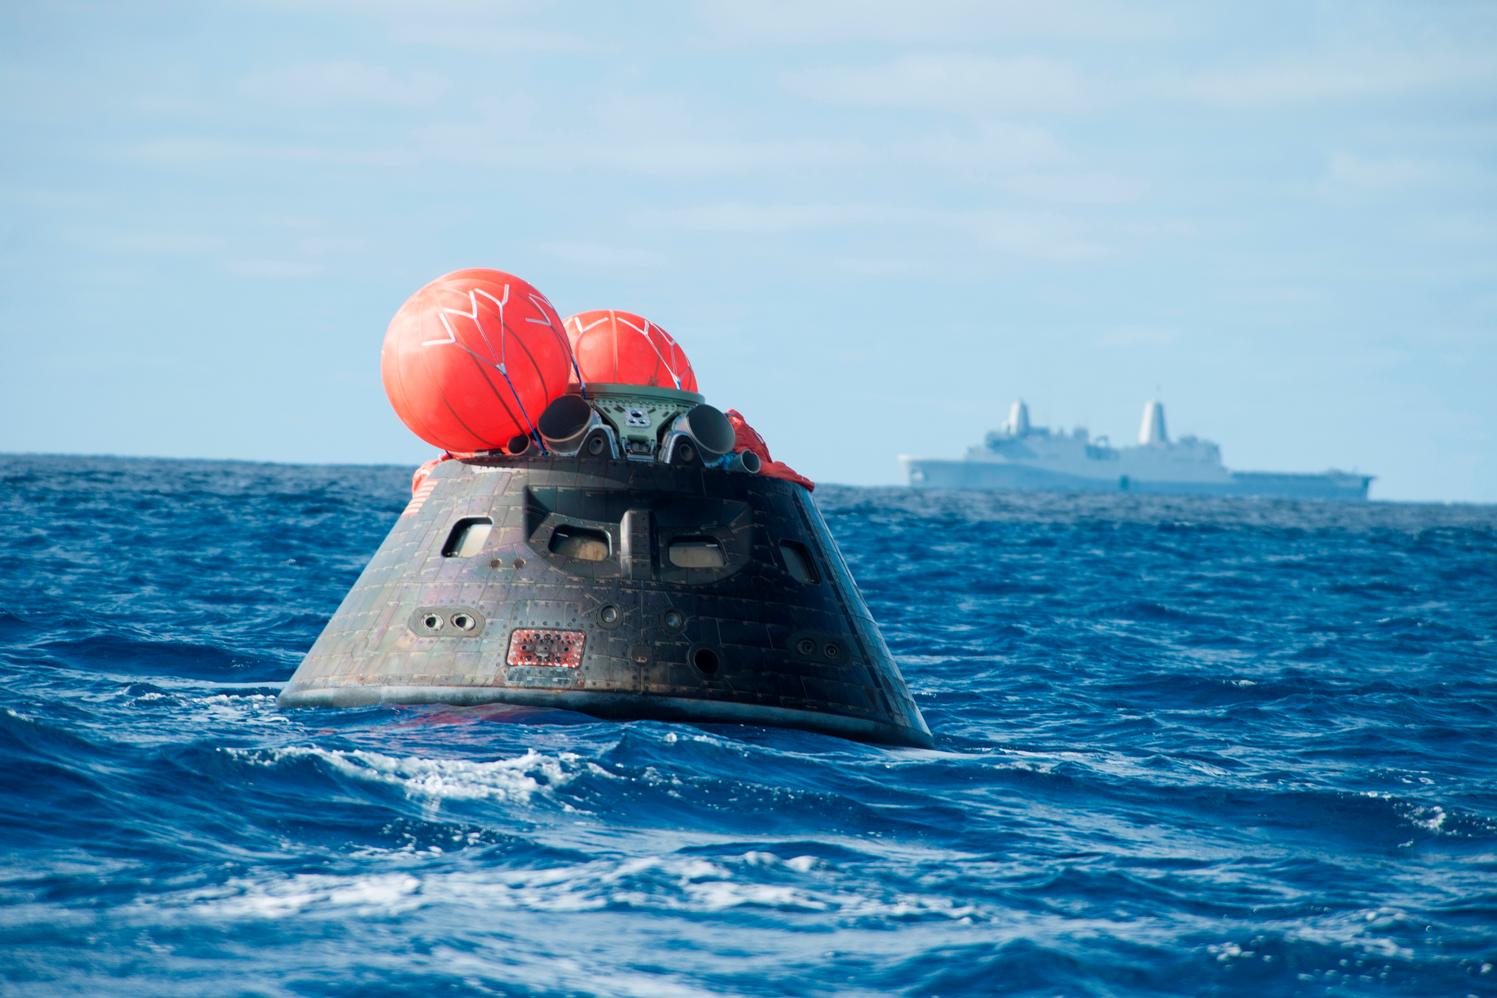 NASA's Orion spacecraft awaits the U.S. Navy's USS Anchorage for a ride home.